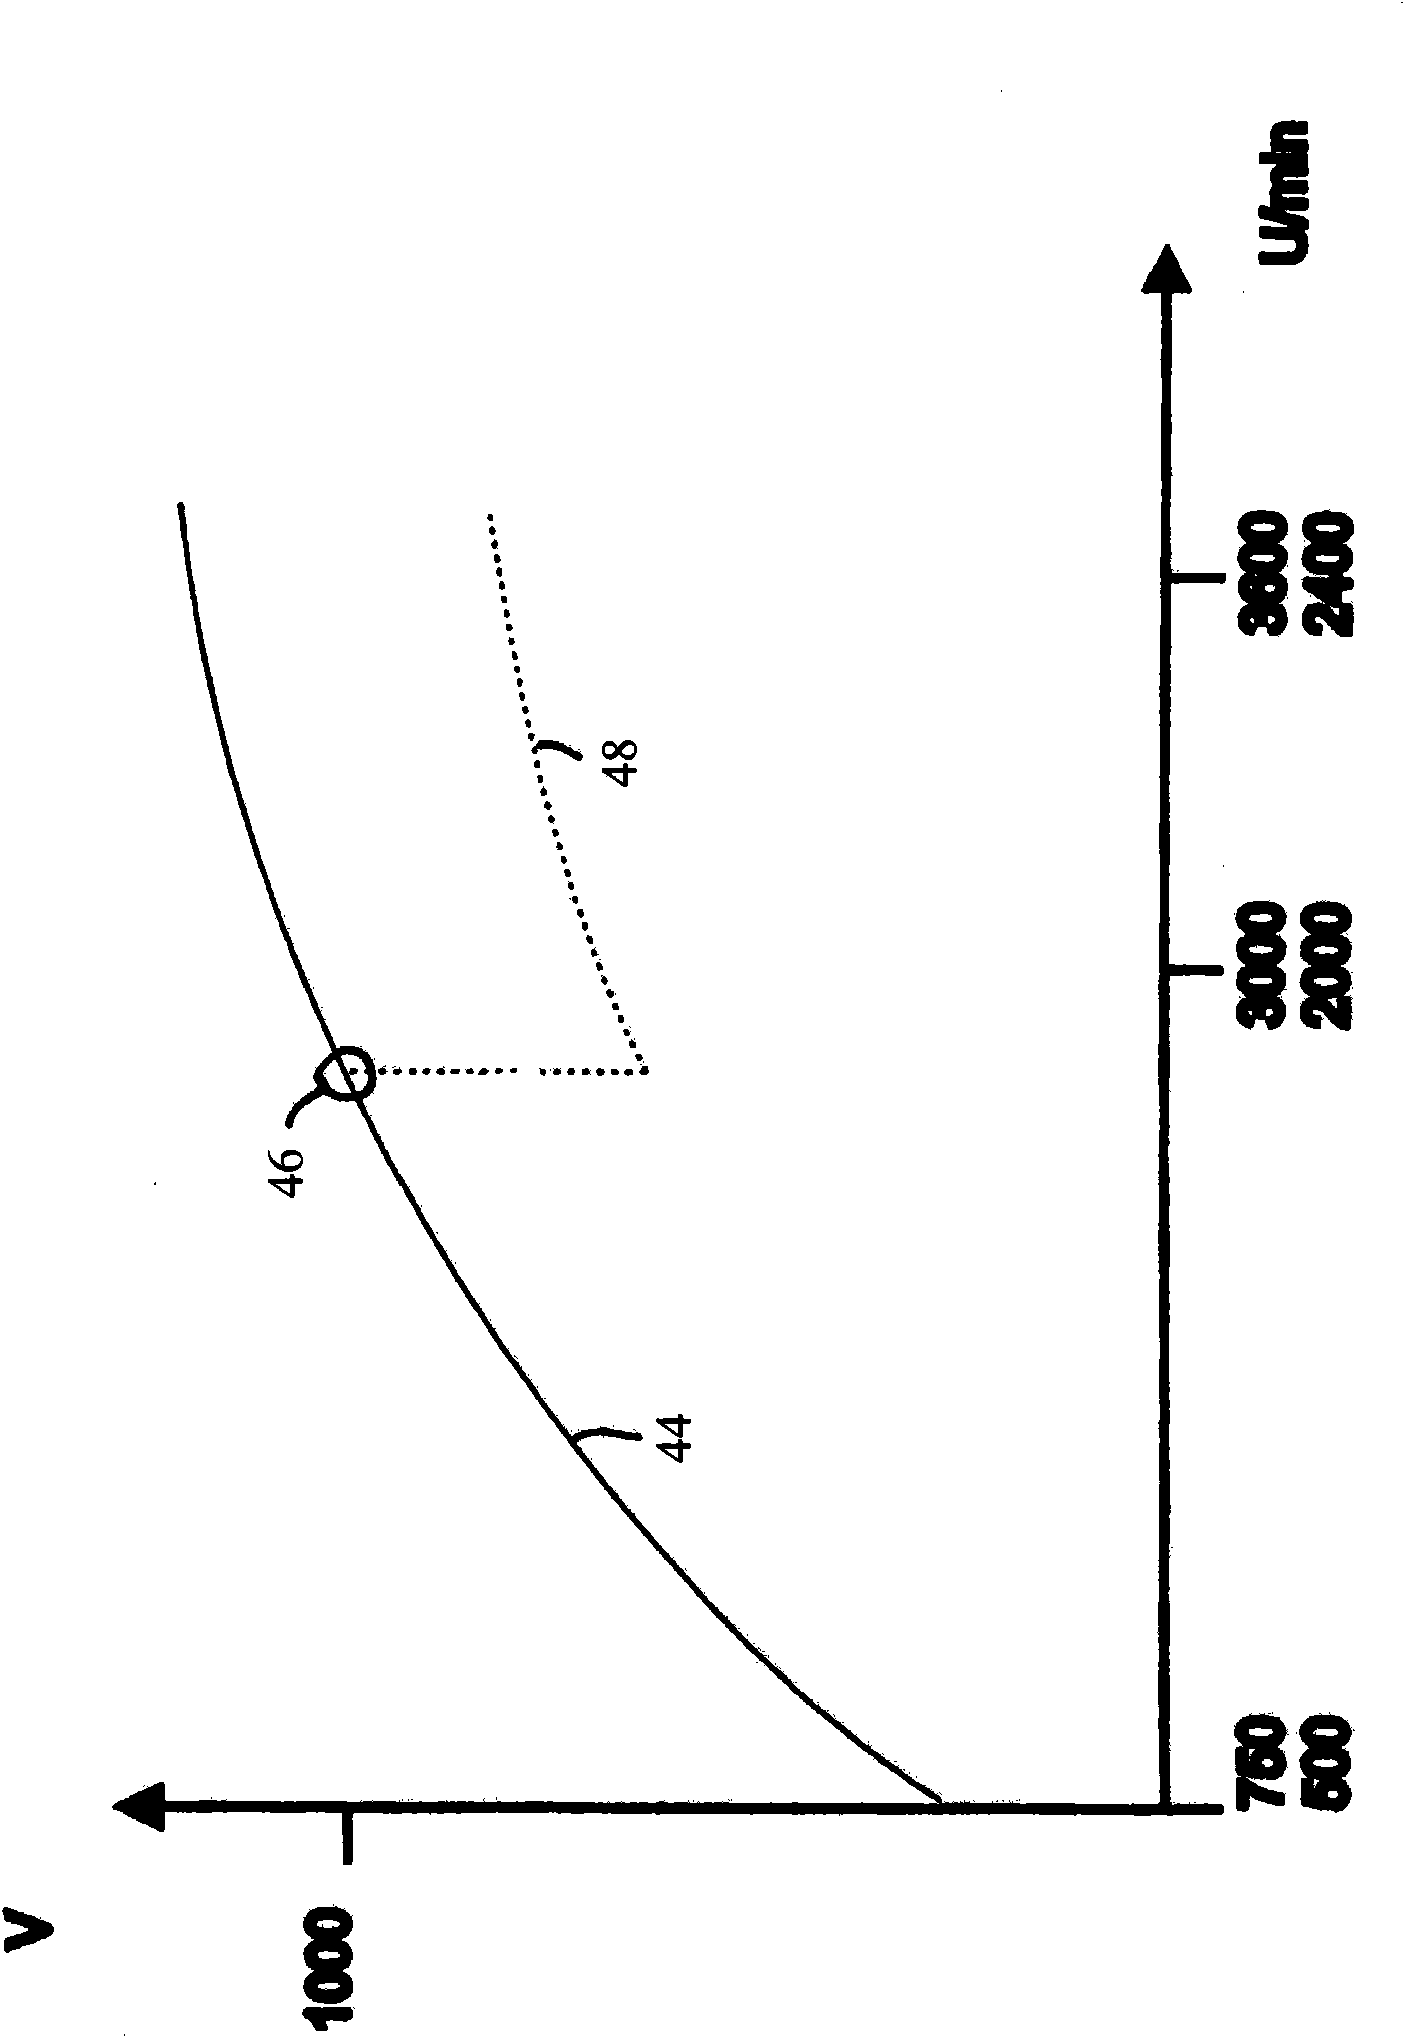 Compressor and method for controlling a compressor for supplying compressed air to a utility vehicle